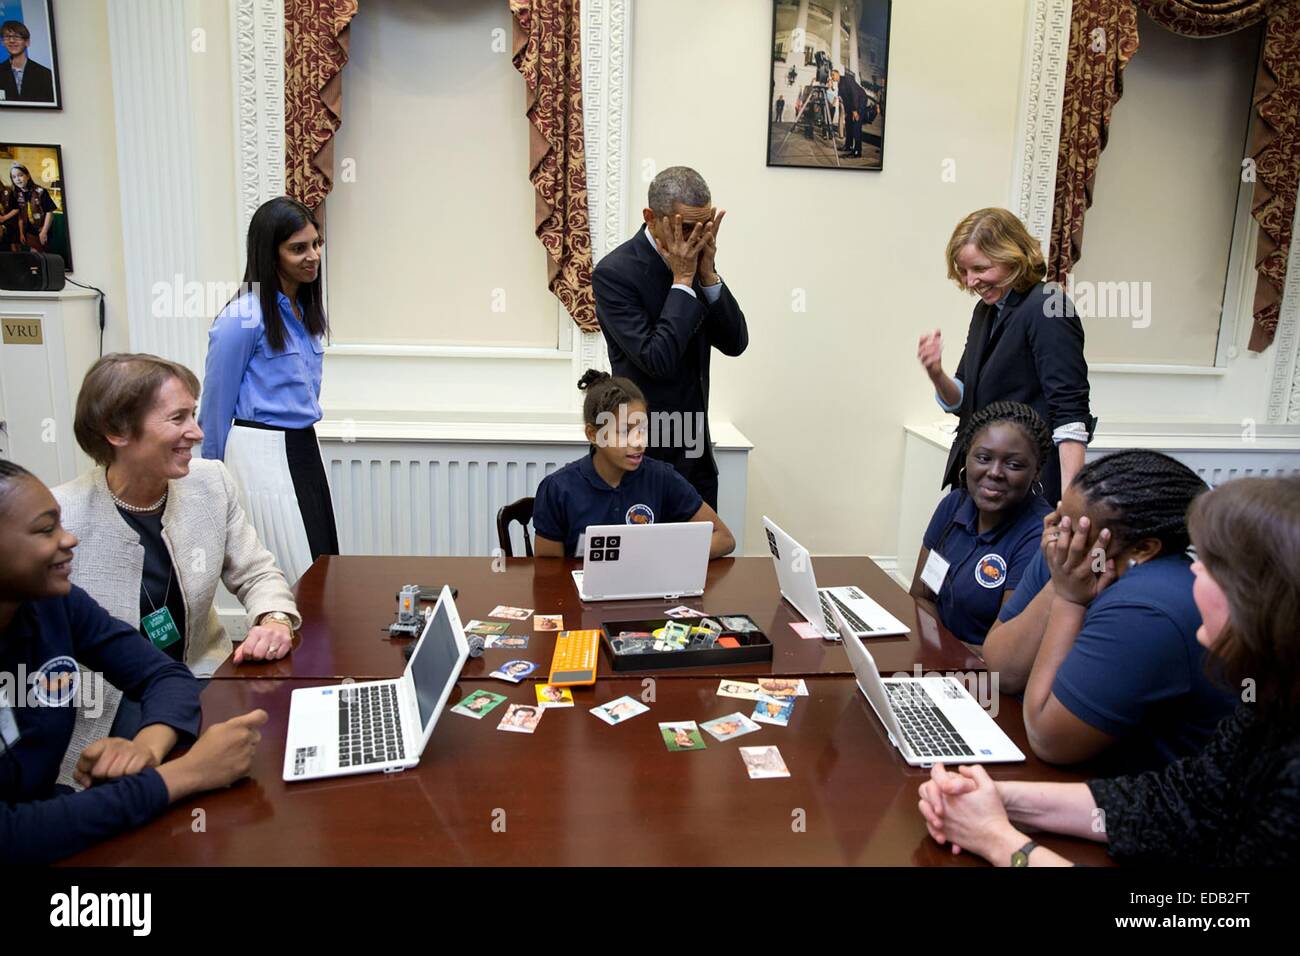 US President Barack Obama mimics a middle-school student overcome with emotion at meeting him during an Hour of Code event to honor Computer Science Education Week at the Eisenhower Executive Office Building December 8, 2014 in Washington, DC. Stock Photo